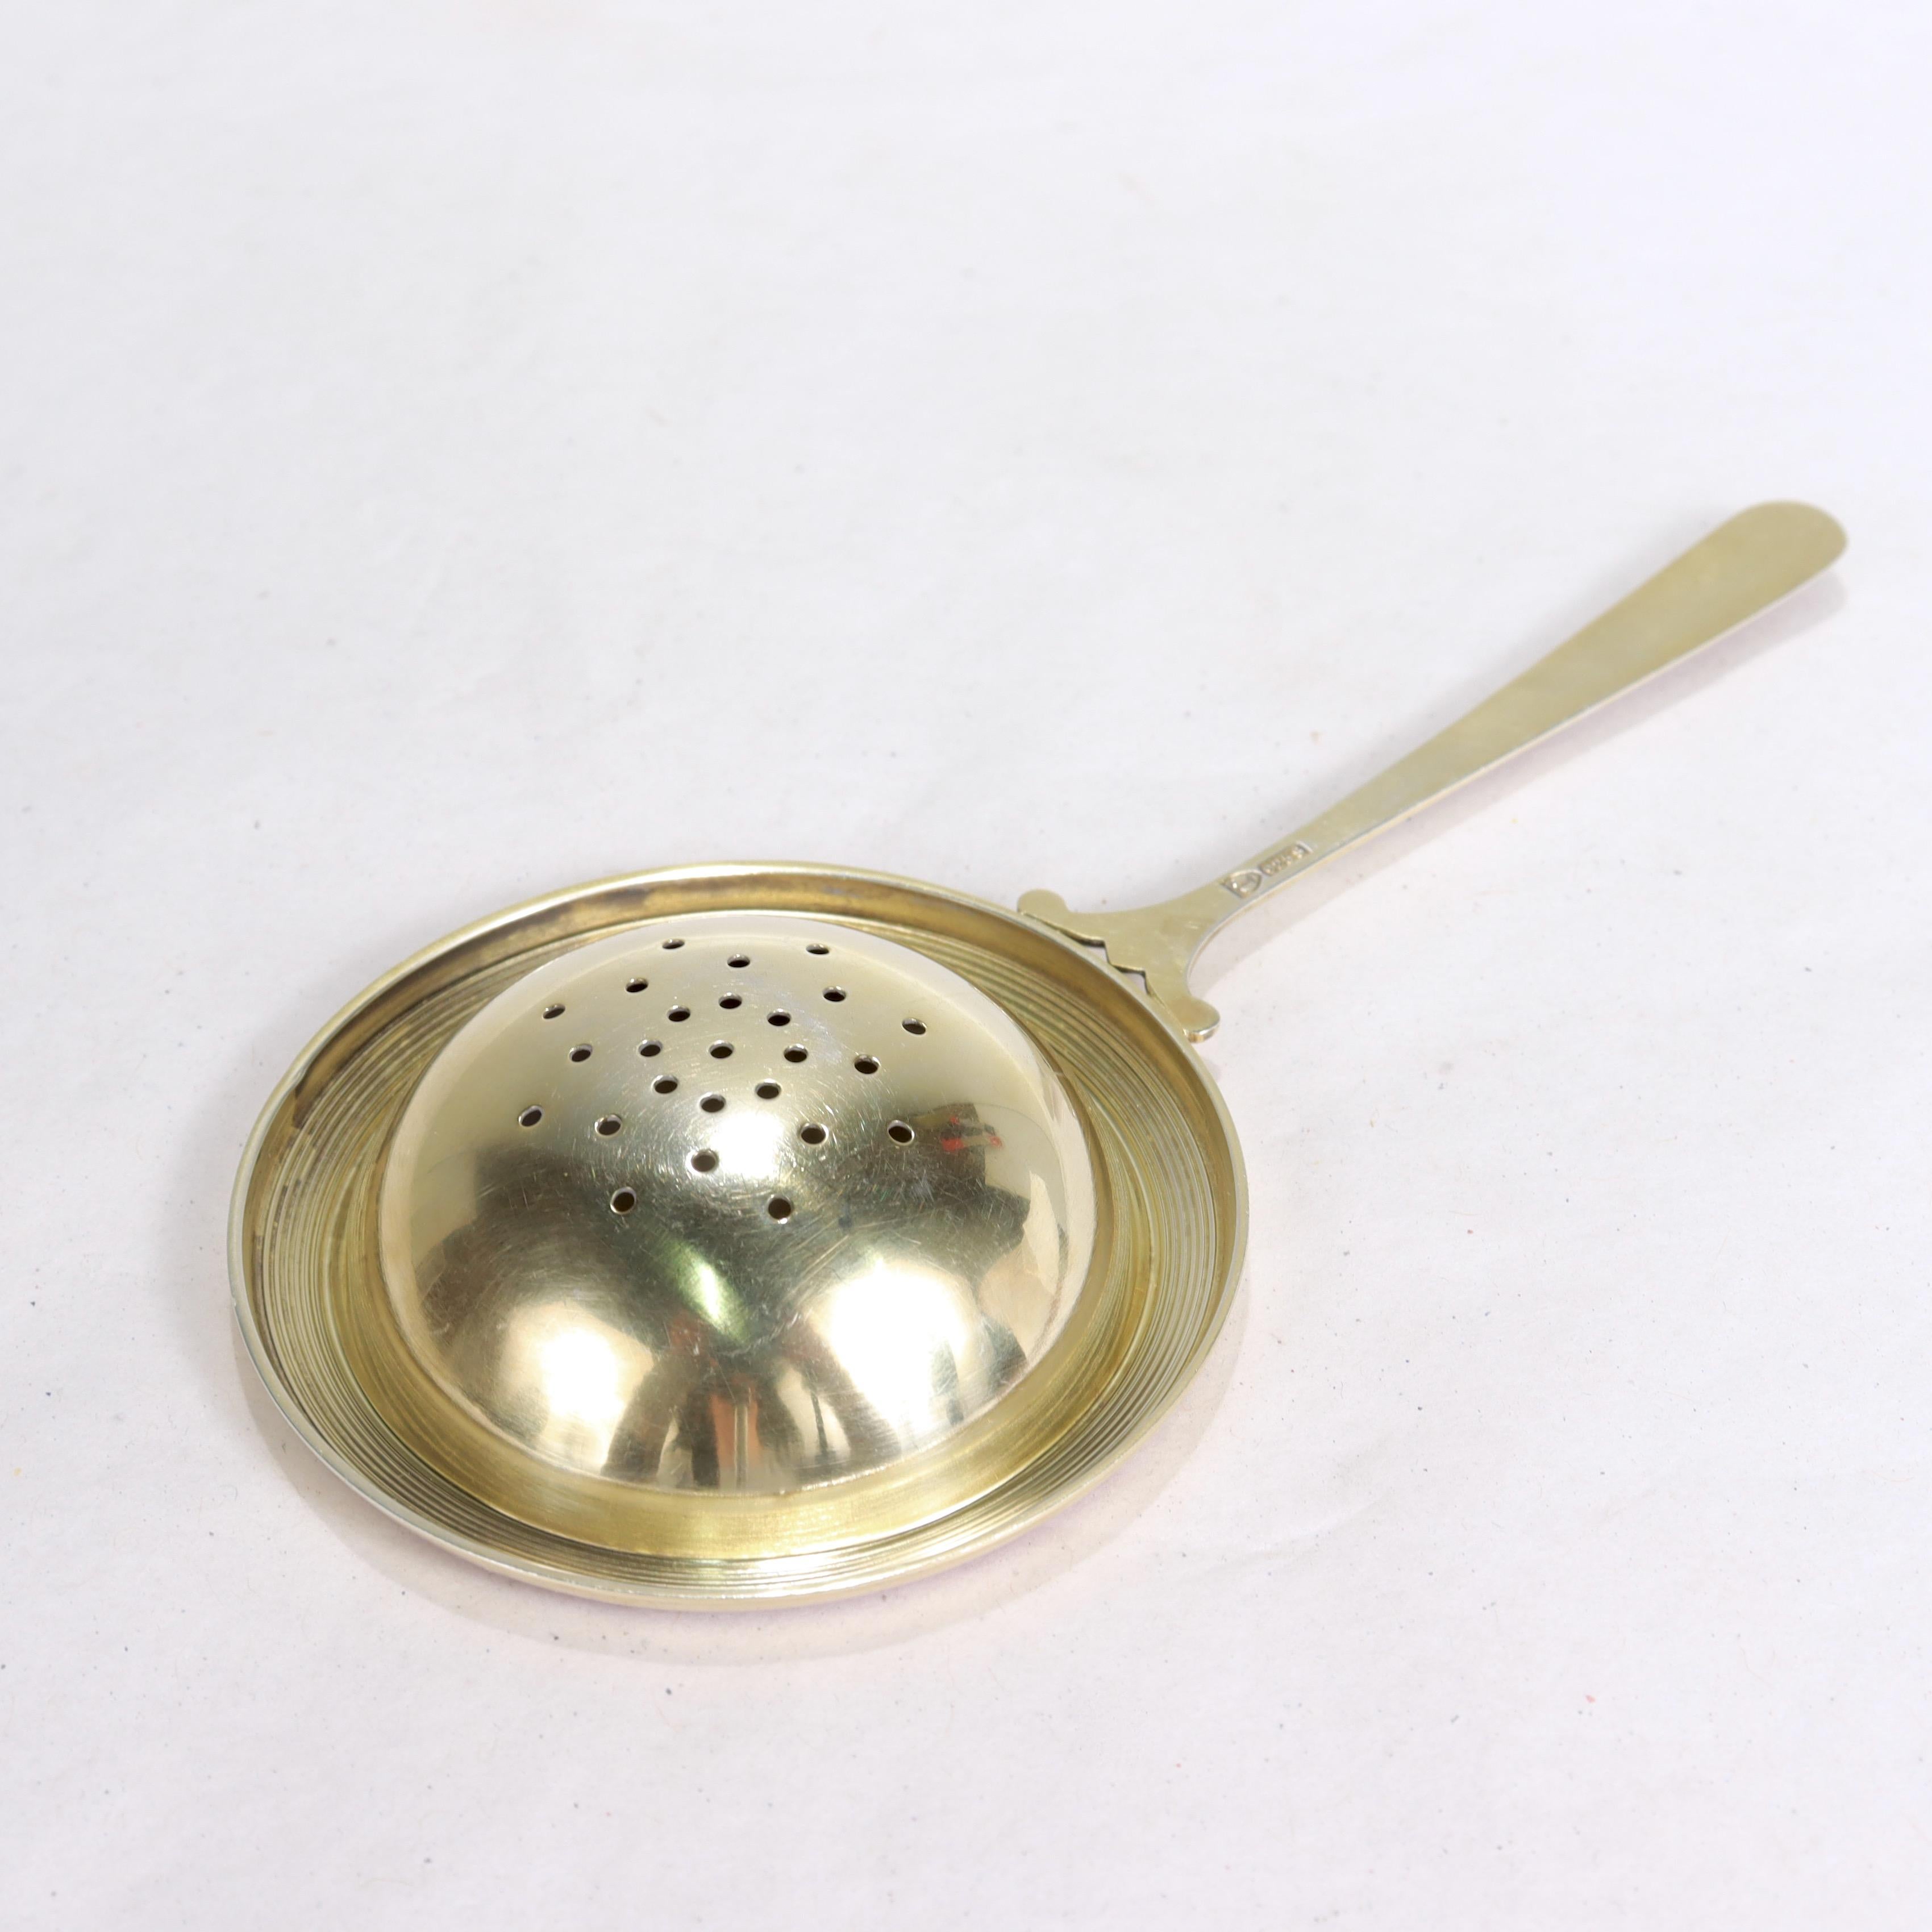 Antique Art Deco Red Enamel & Gilt Sterling Silver Tea Strainer by N.M. Thune In Good Condition For Sale In Philadelphia, PA